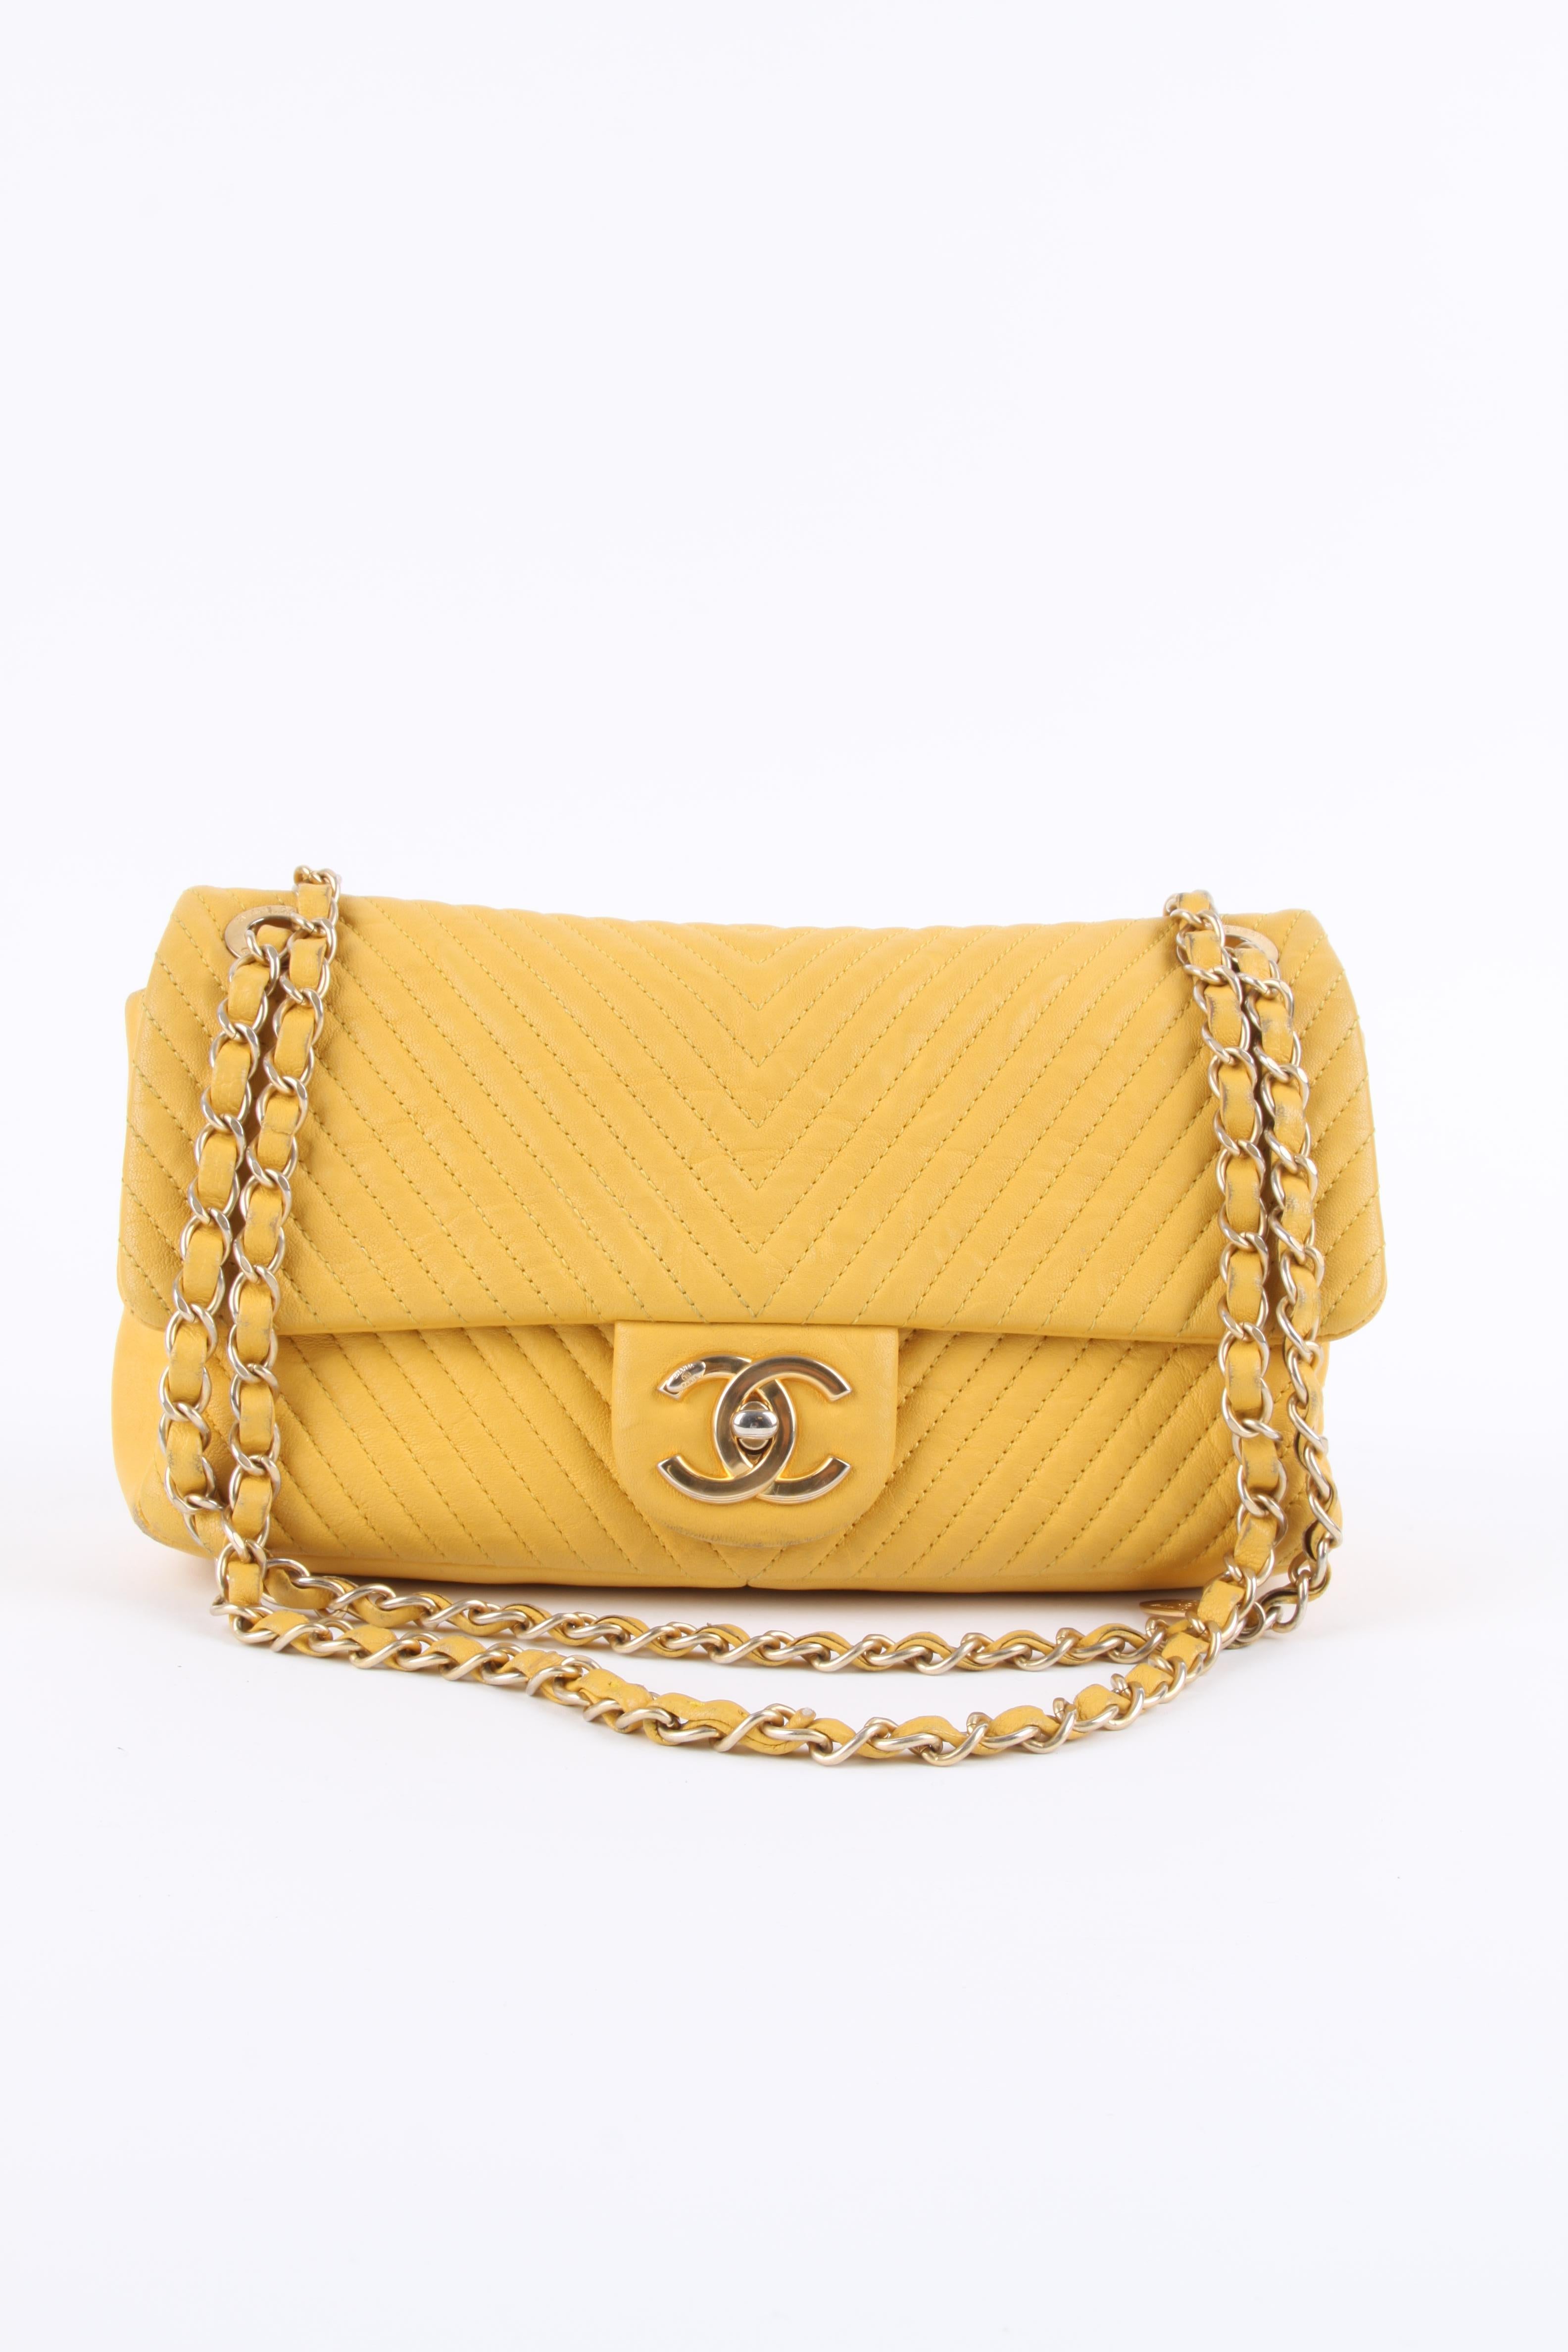 The Chanel Chevron Quilted Rectangular Flap Bag in ocher yellow leather. Woww!! 

The exterior quilting is vertically applied, Chanel named this pattern Chevron. Closure at the front with a gold-tone CC turnlock, the long chain is entwined with